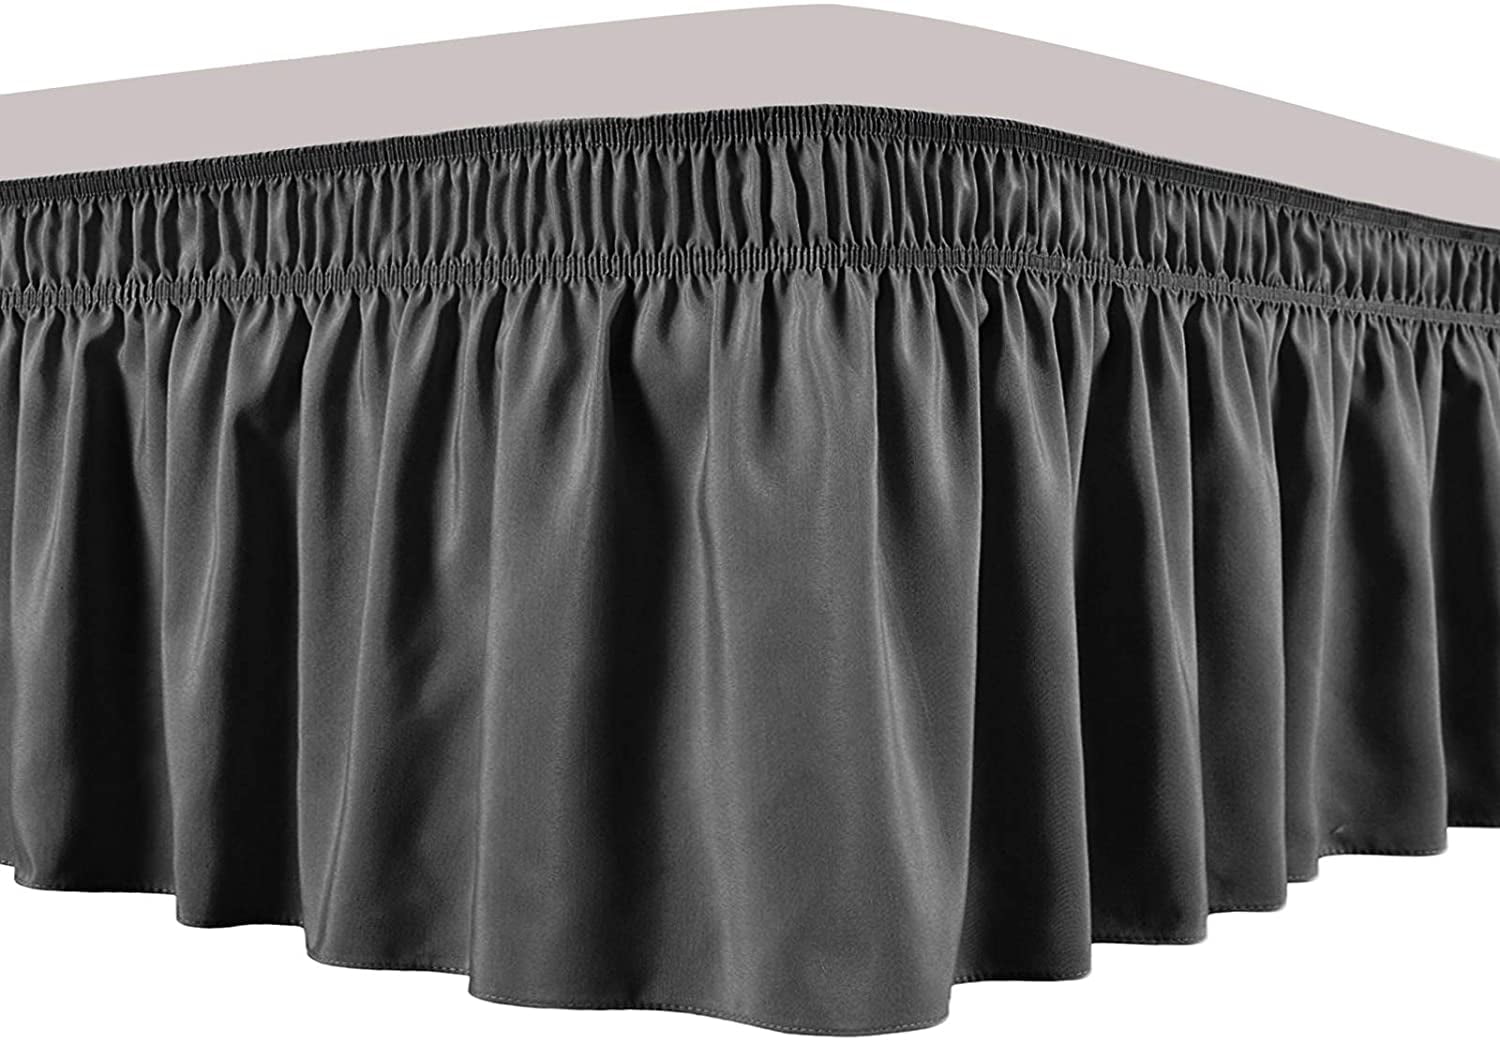 Elastic Embroidered Bed Ruffle Skirt Valance Easy Fit Wrap Around Soft Queen Bed 